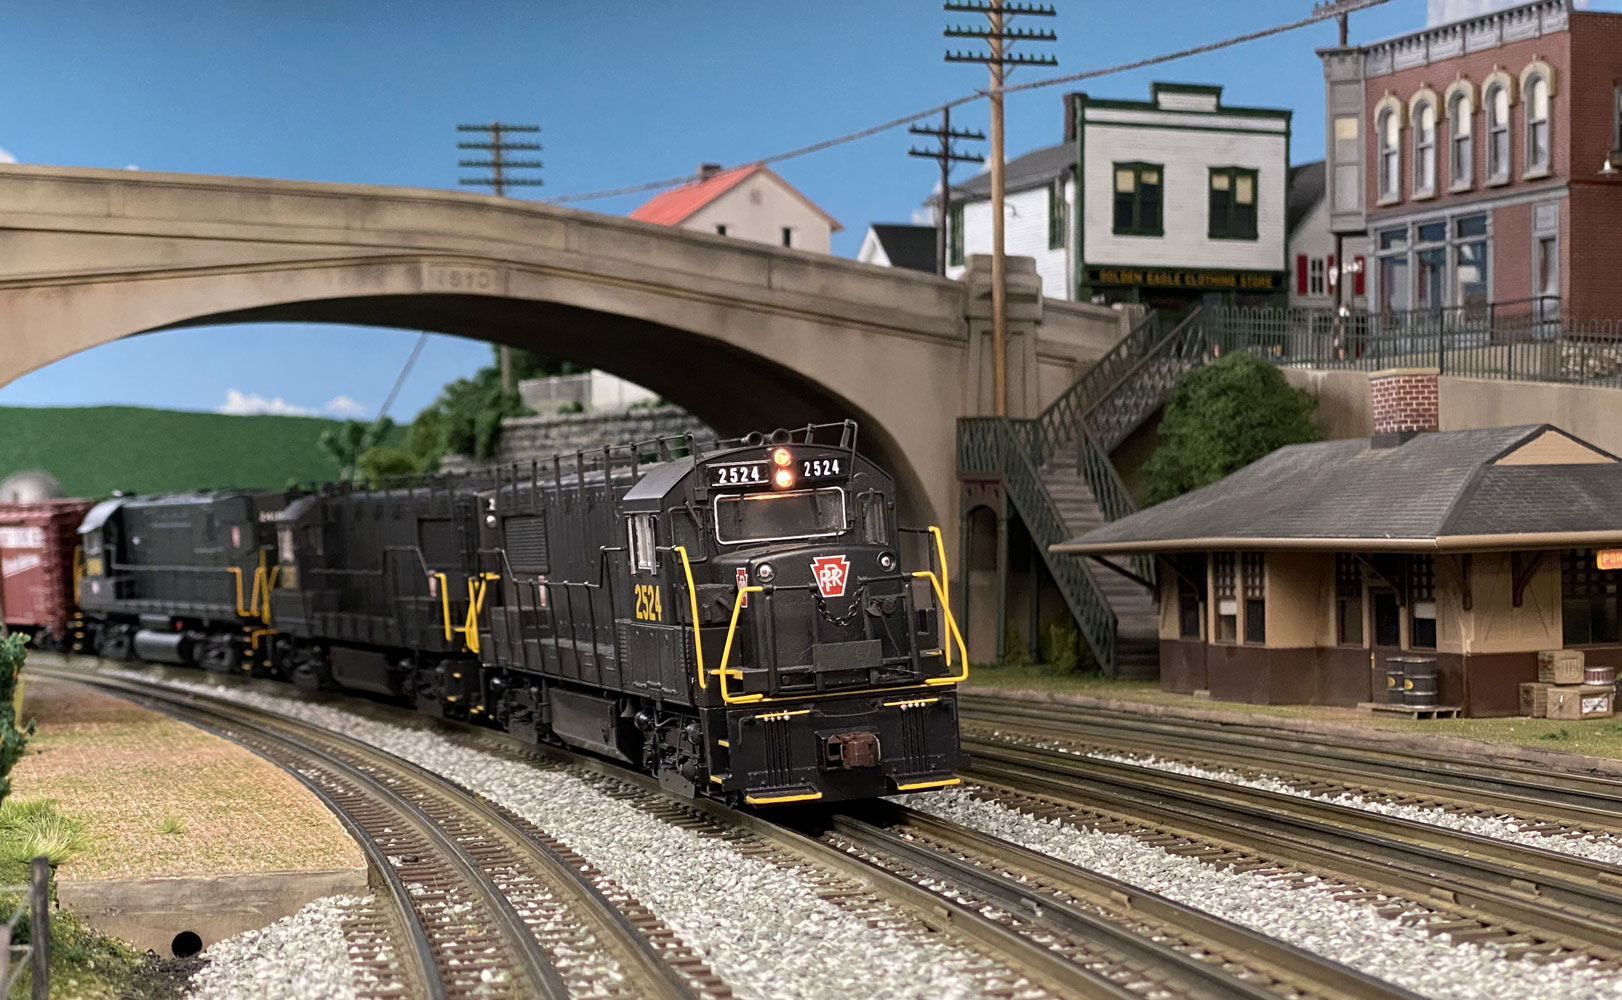 A train on Neal Schorr's layout